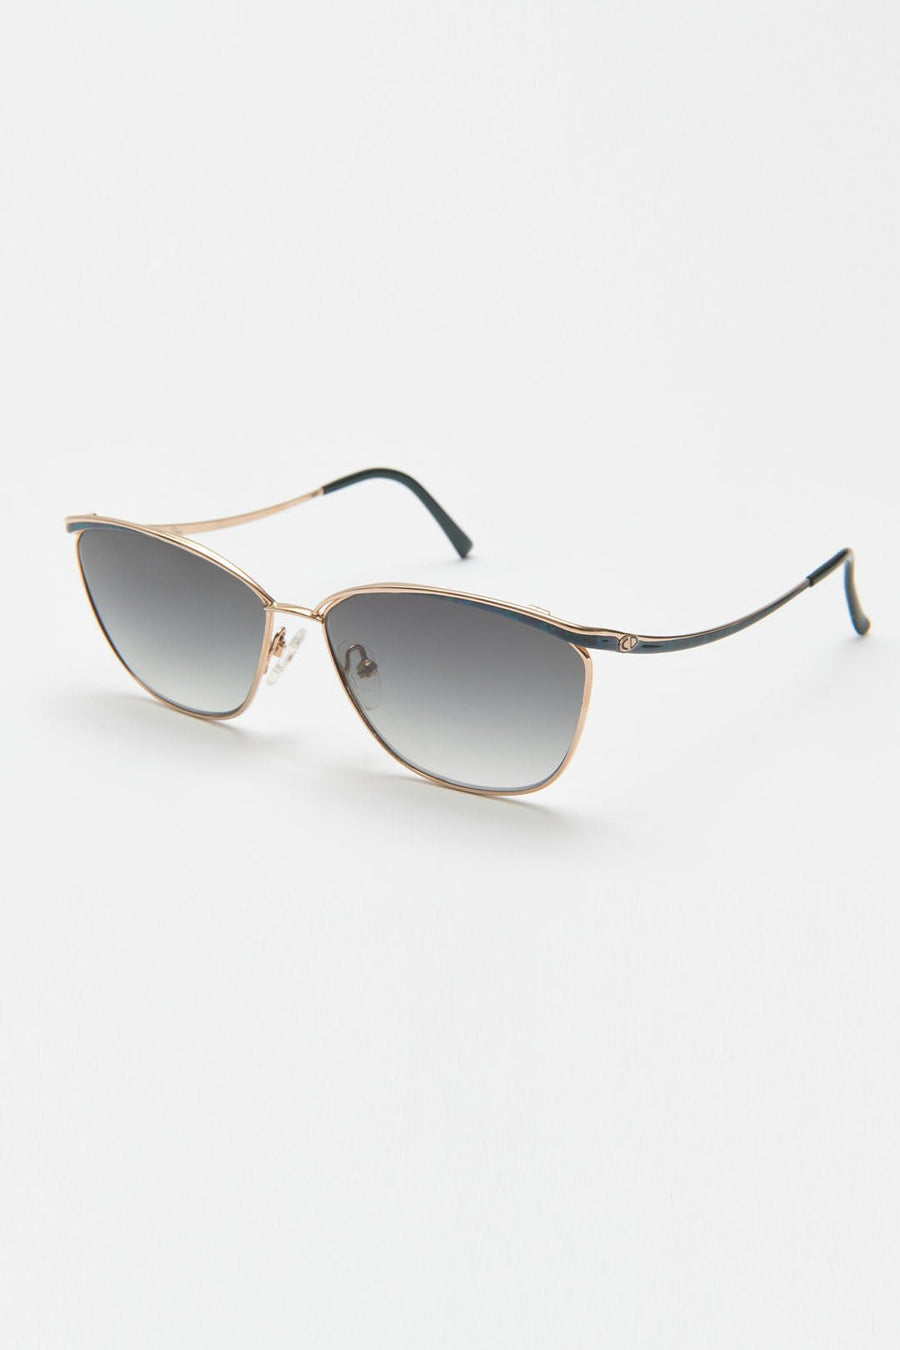 VINTAGE DIOR SUNGLASSES, TAUPE - Burning Torch Online Boutique